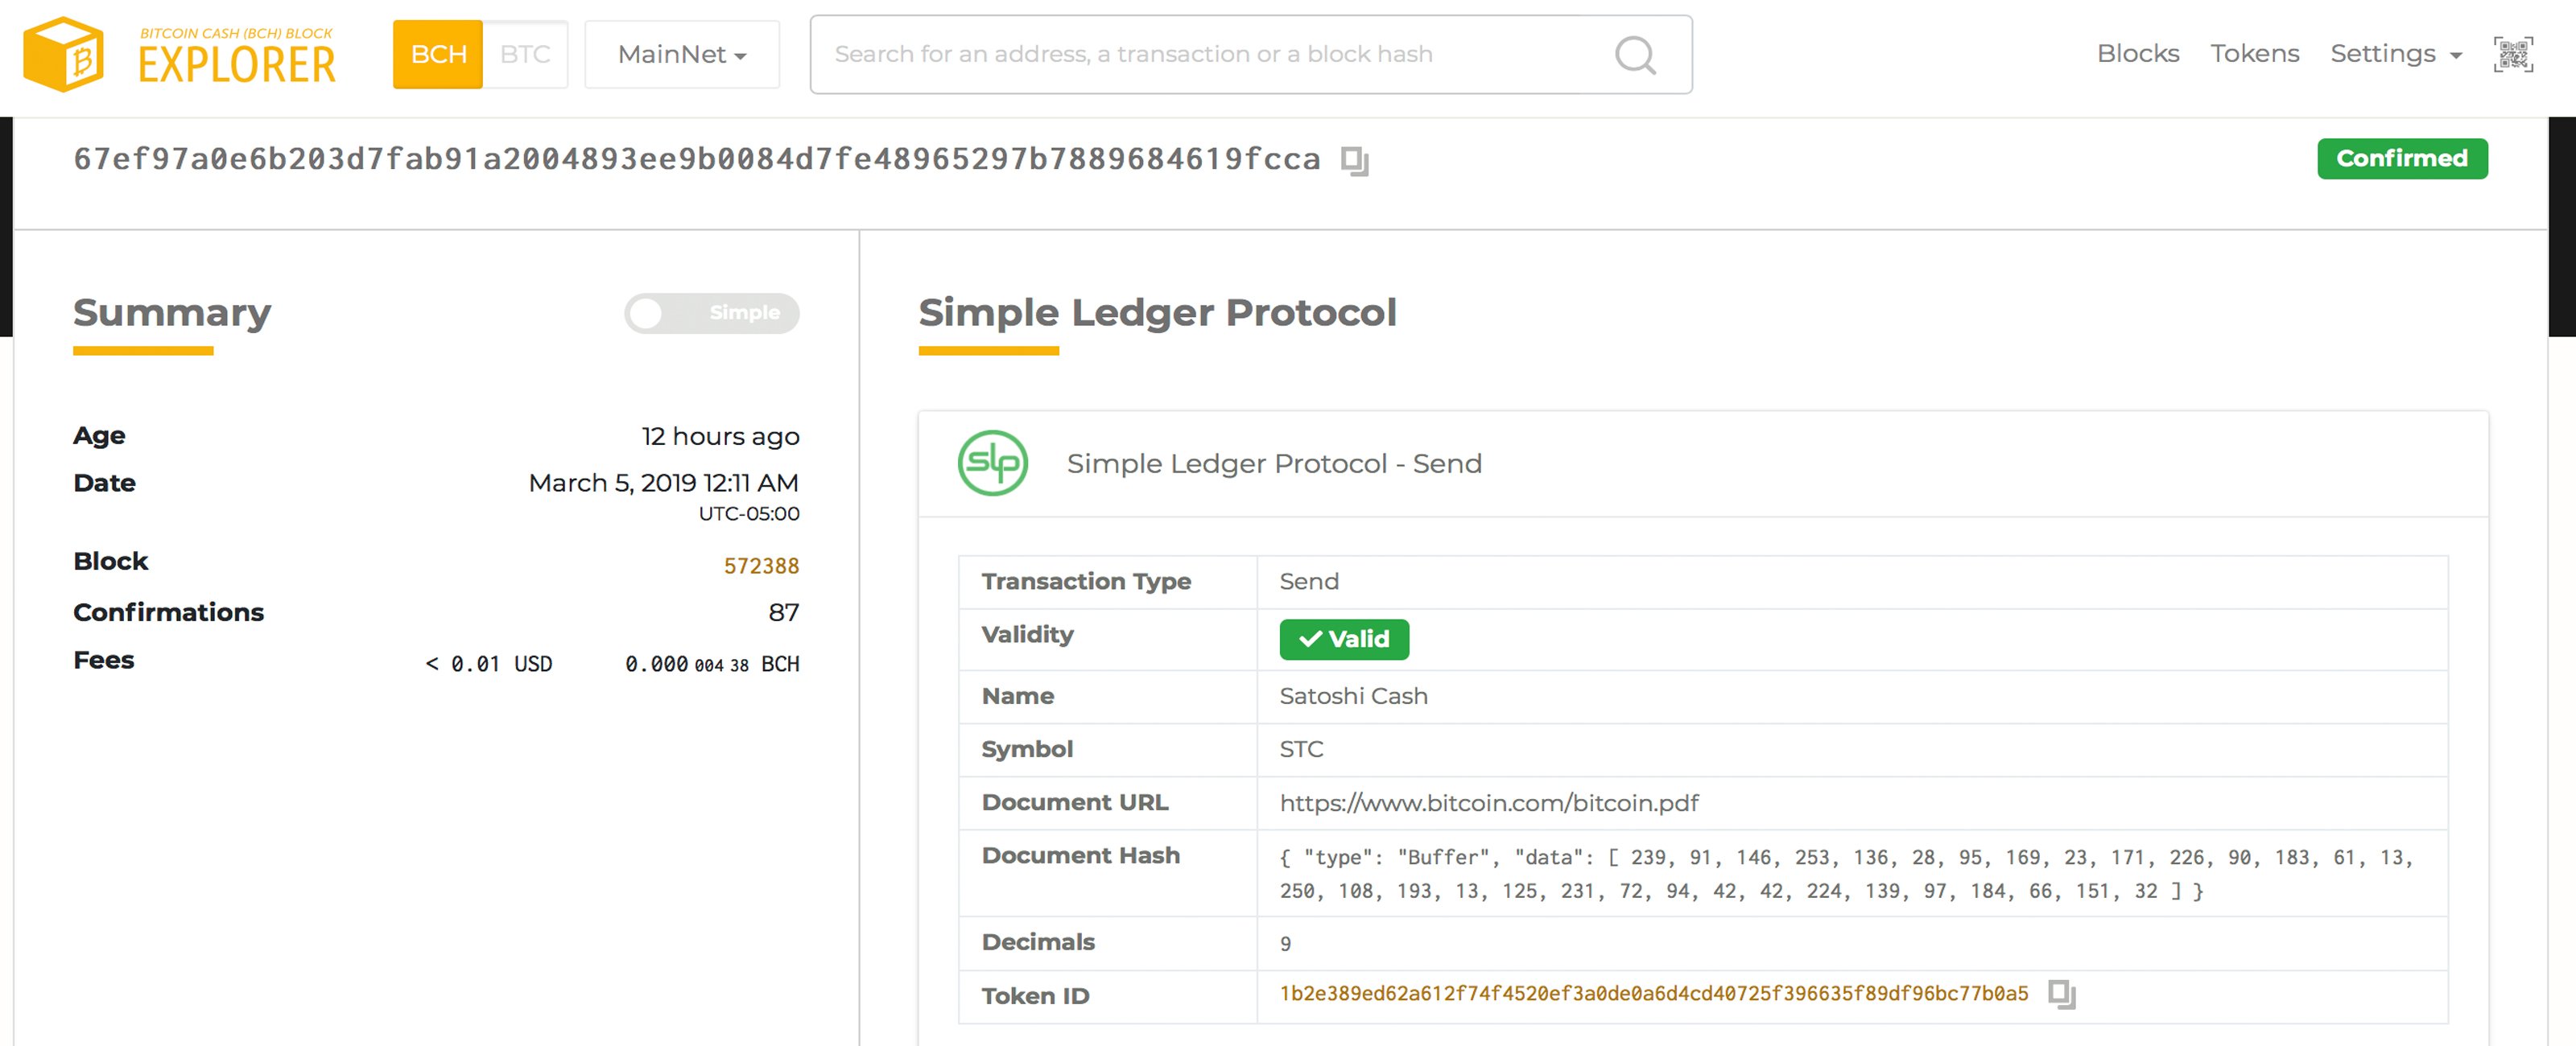 How to Create Your Own SLP Token Using the Bitcoin Cash Blockchain 